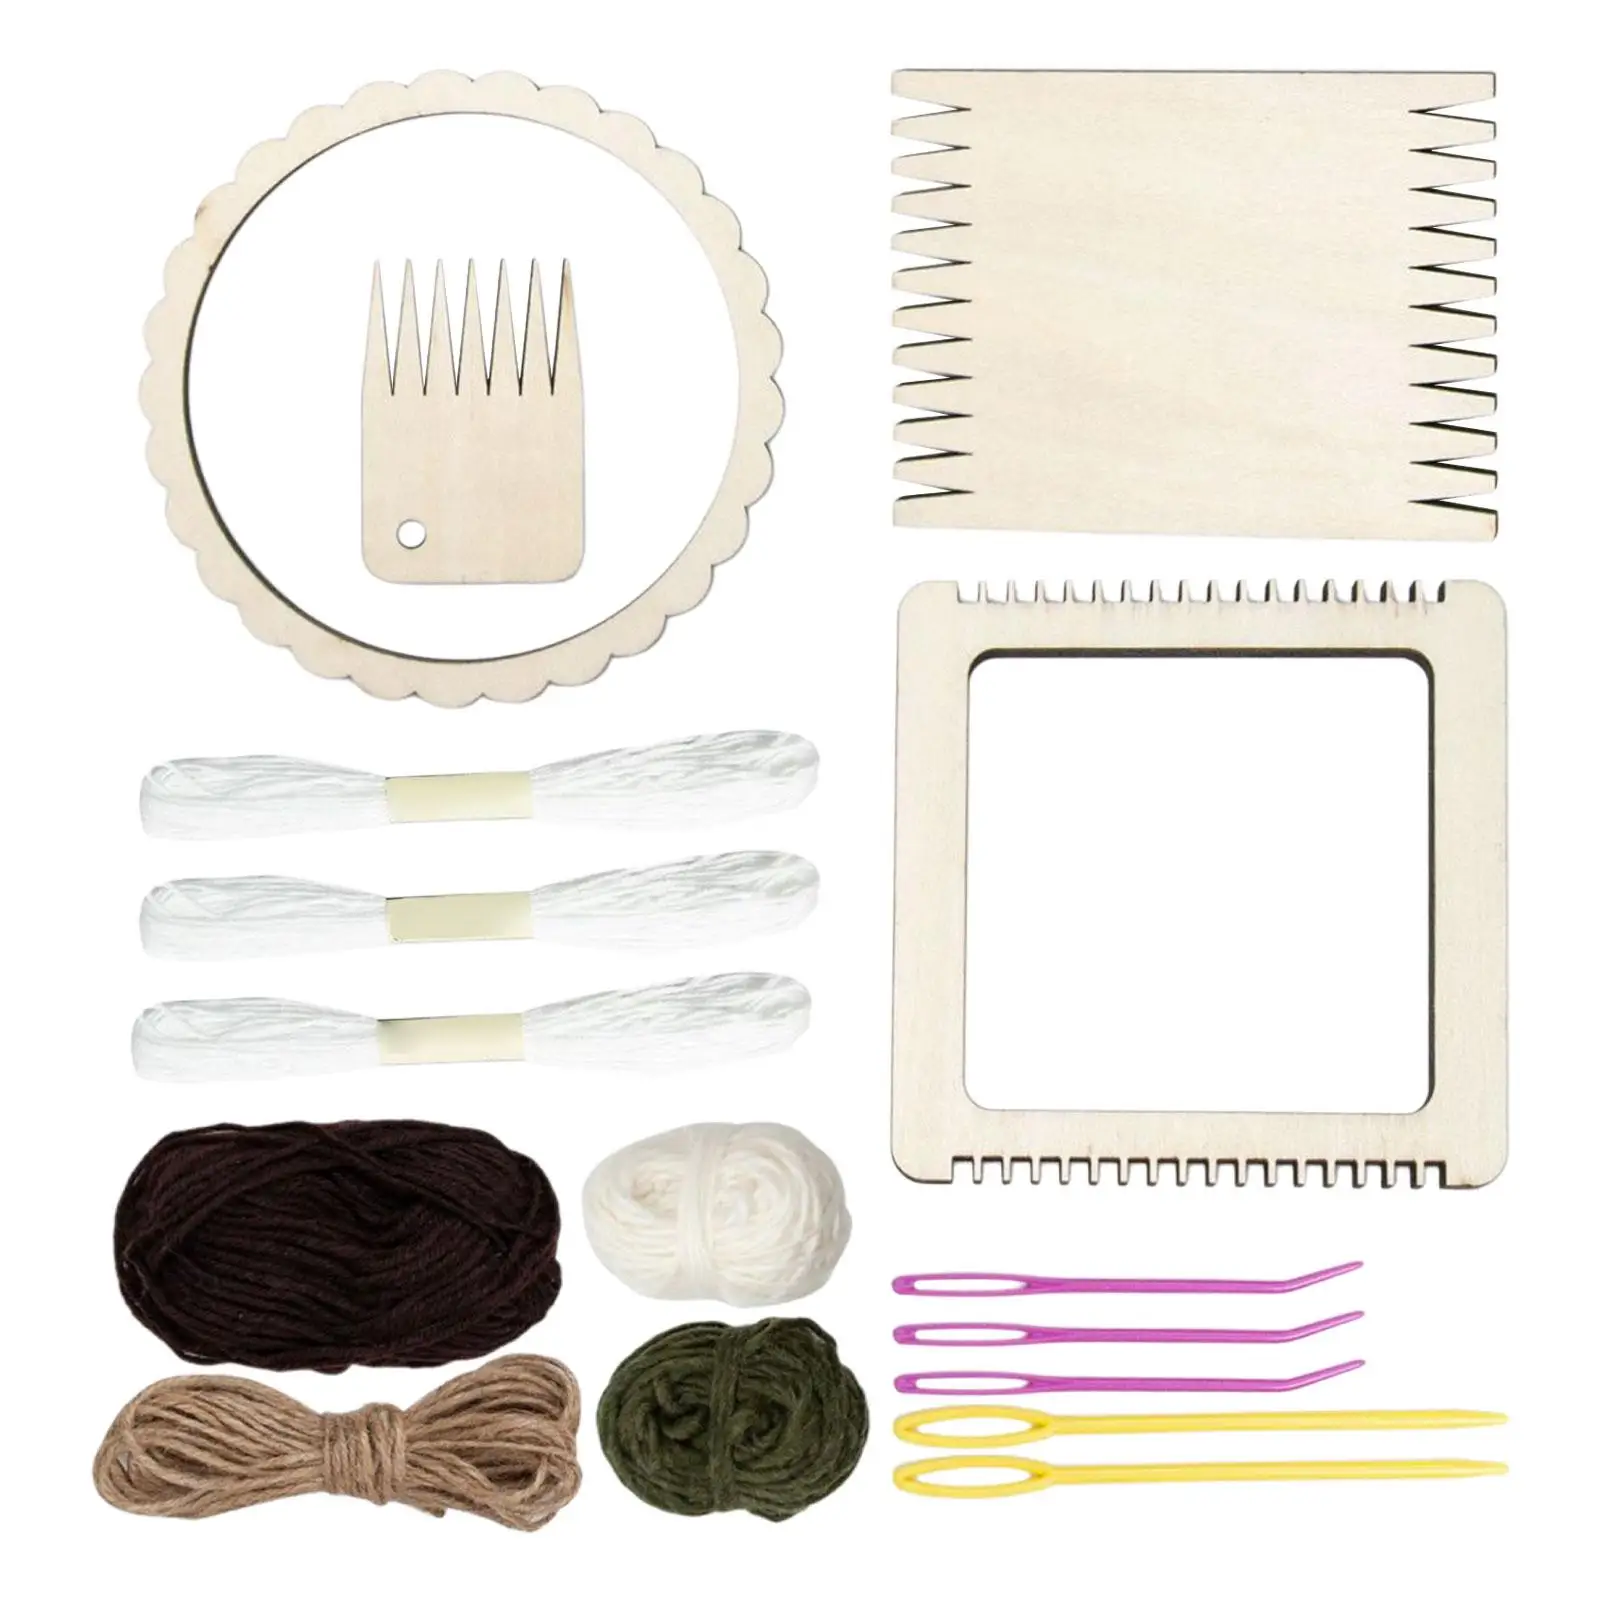 

Mini Wooden Weaving Loom Kit Combs Needles Thread Mini Loom DIY weaving loom Set Wooden Weaving Loom Kit for Tapestry Adults